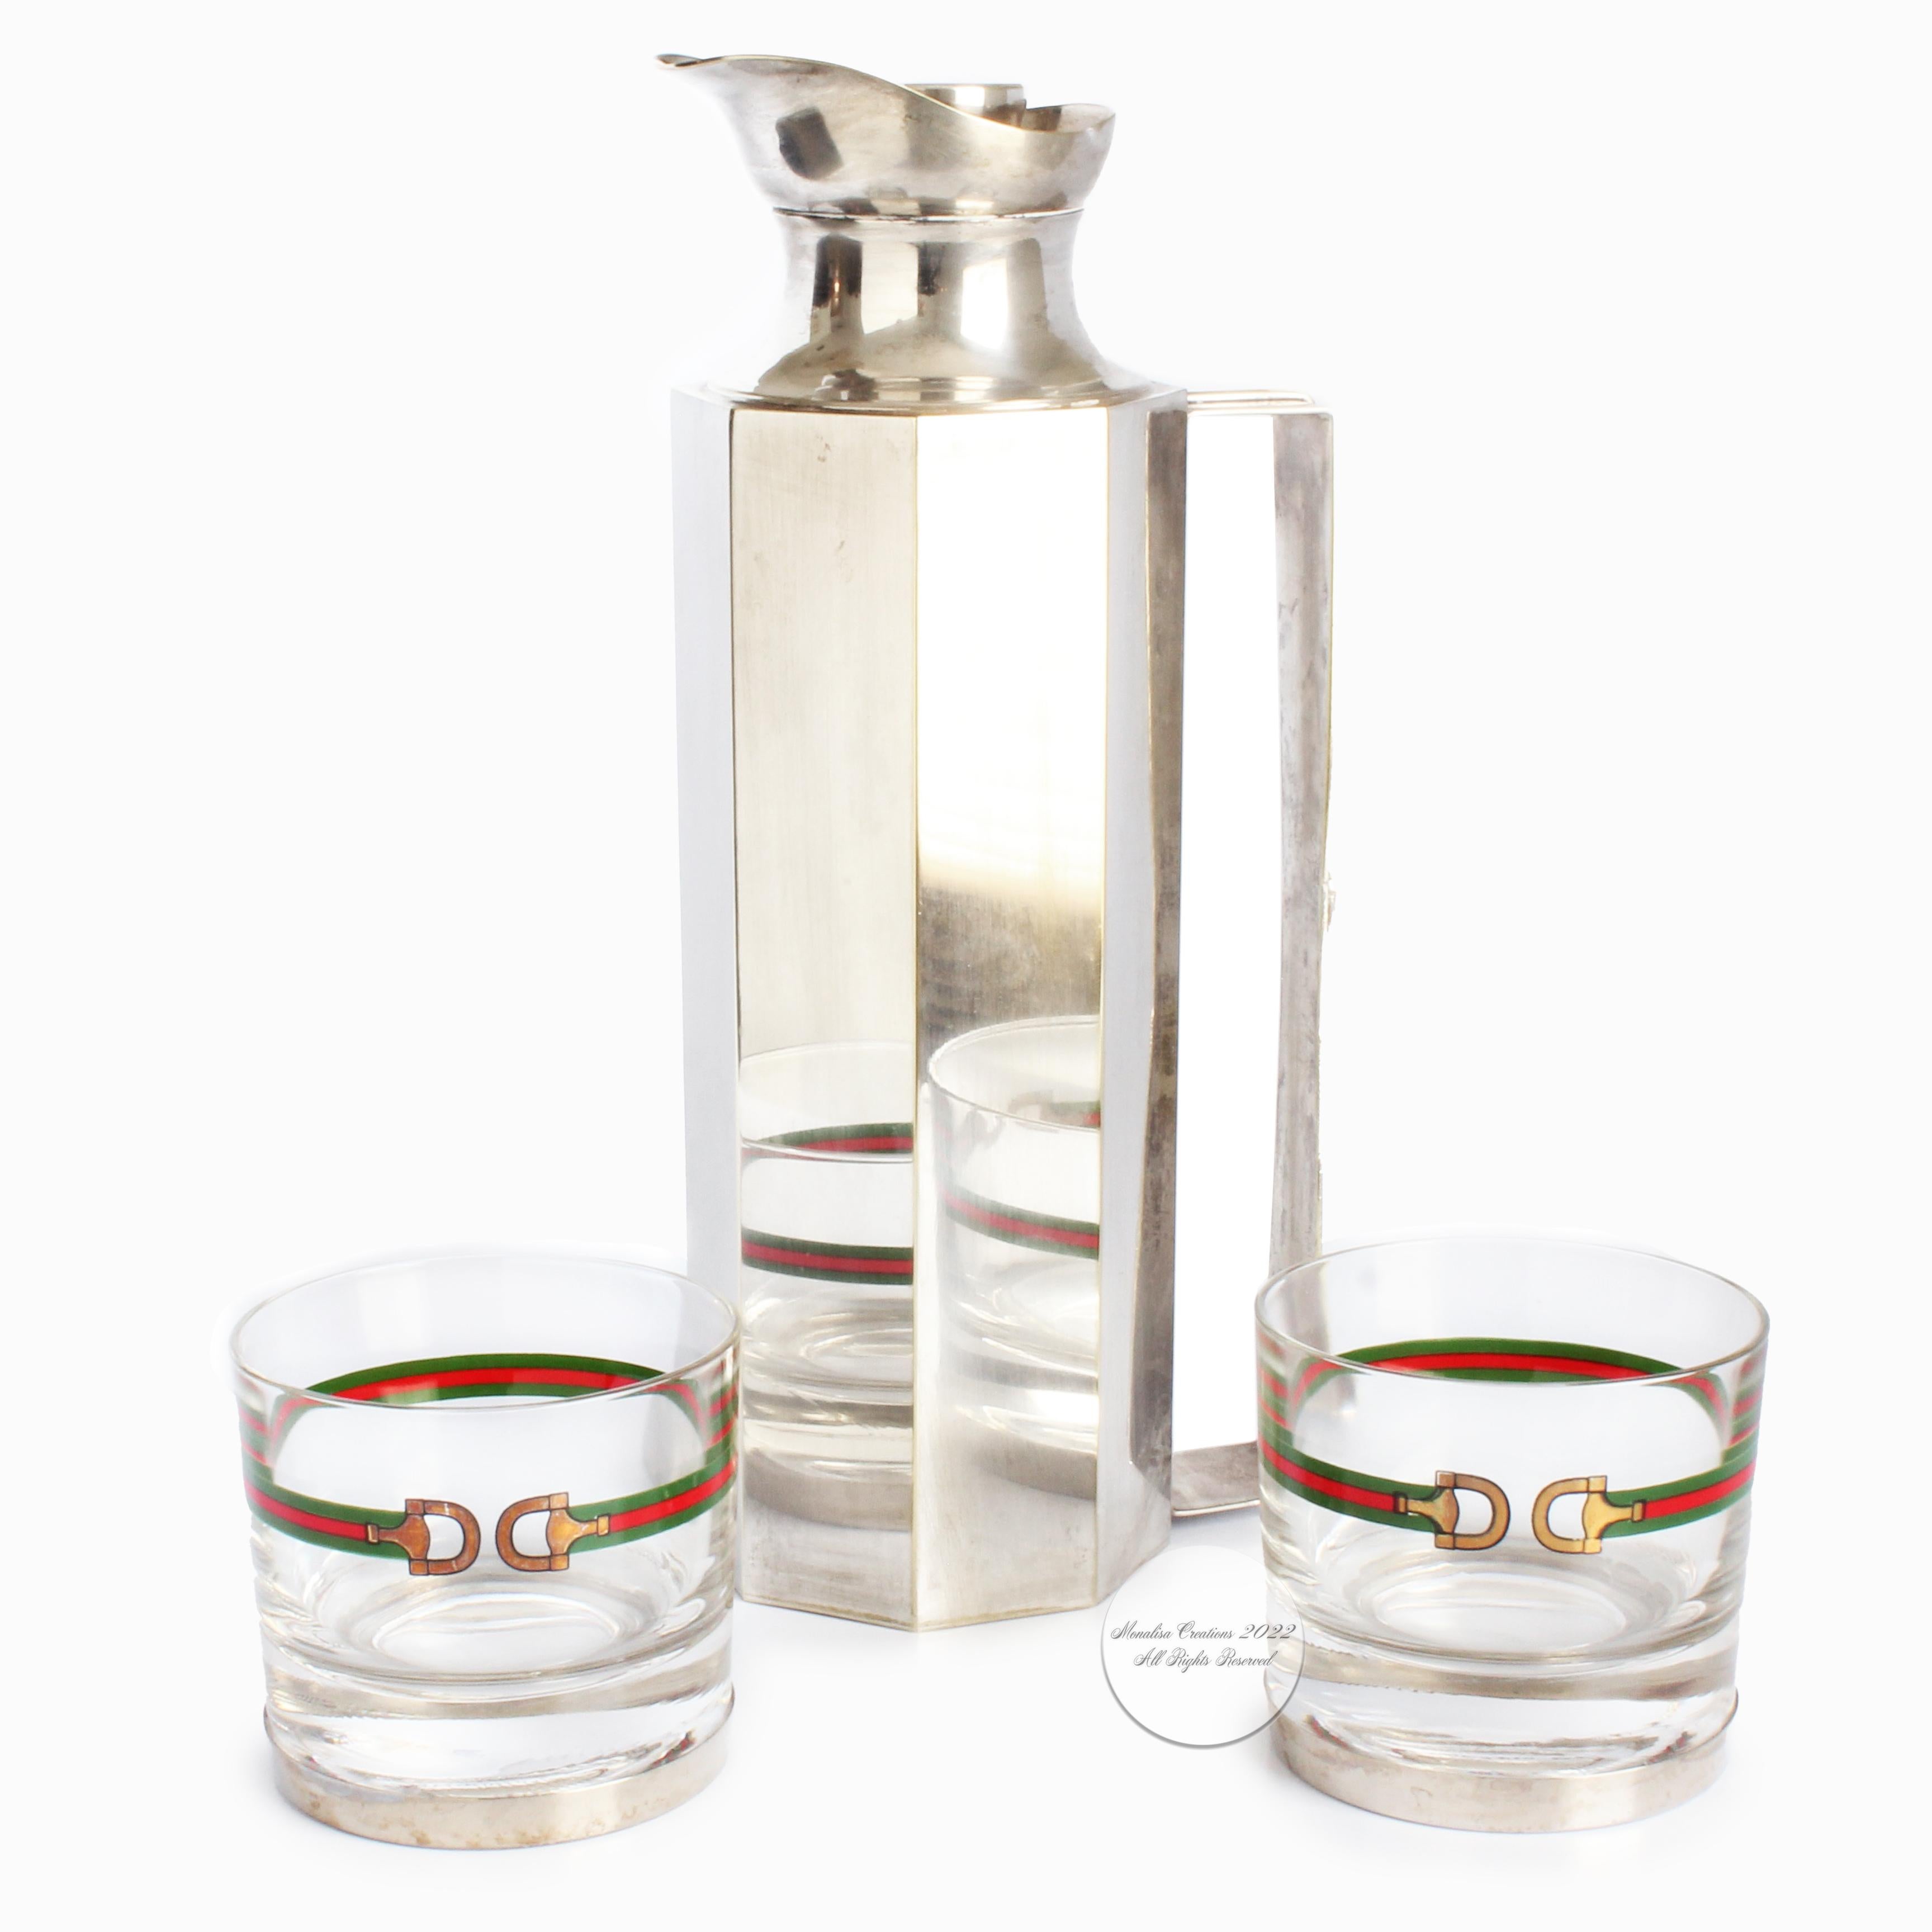 Preowned, authentic, vintage Gucci barware horse bit motif cocktail glasses and silver plate decanter, circa the 70s.  Set includes 2 cocktail glasses, made of crystal with silver plate base and 1 silver plate decanter with lid.  Fabulous home decor